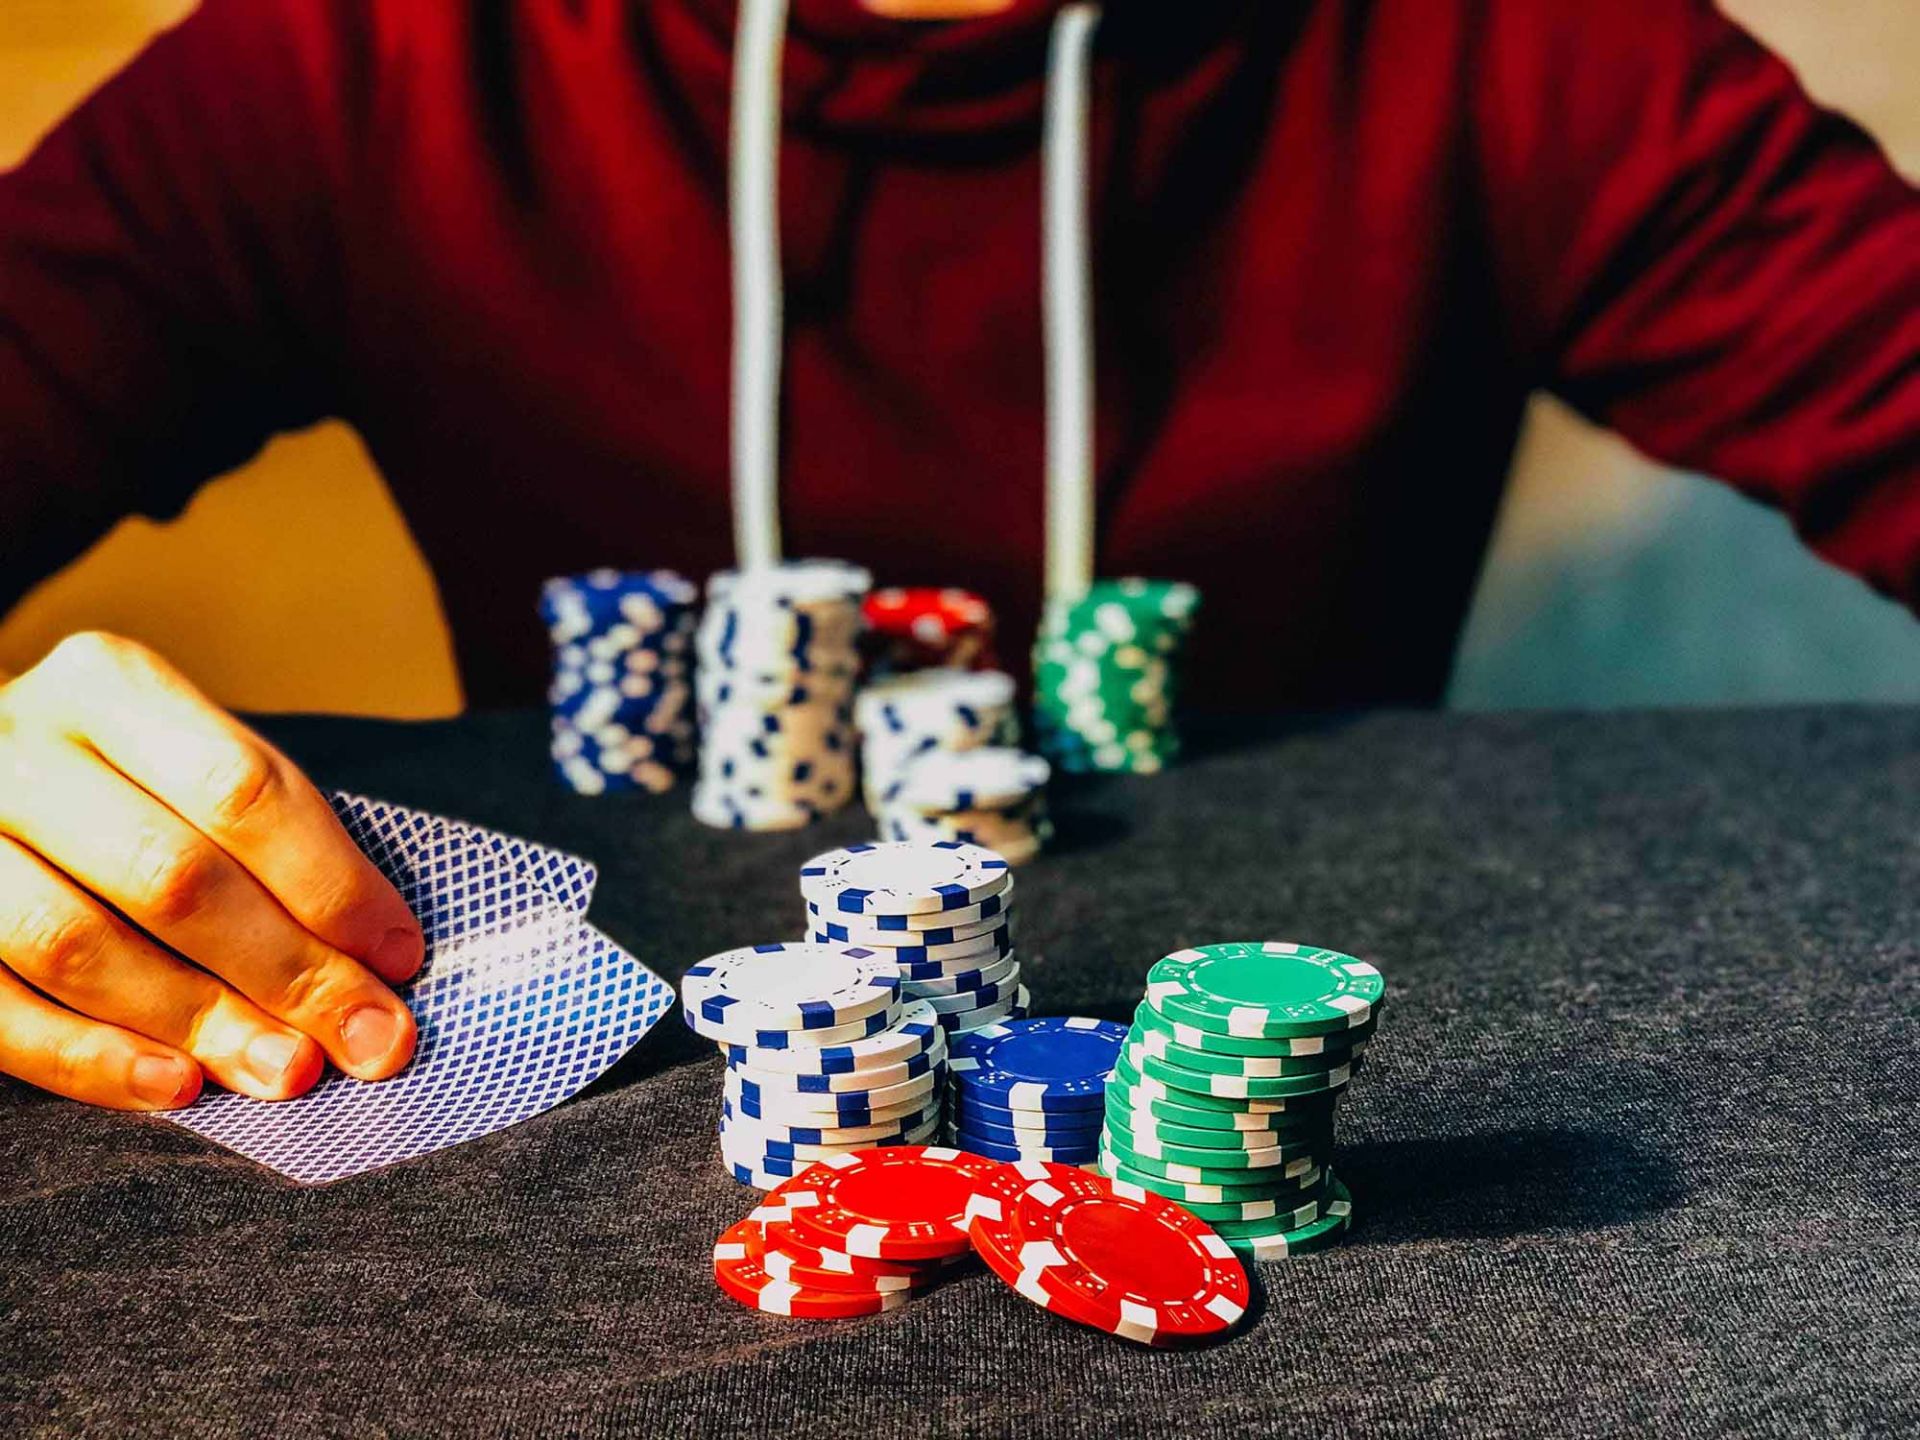 Play your favourite Live Casino games at Fun88 India, including Roulette, Blackjack, Poker, and some of the best Live Dealer gameshow games available online.